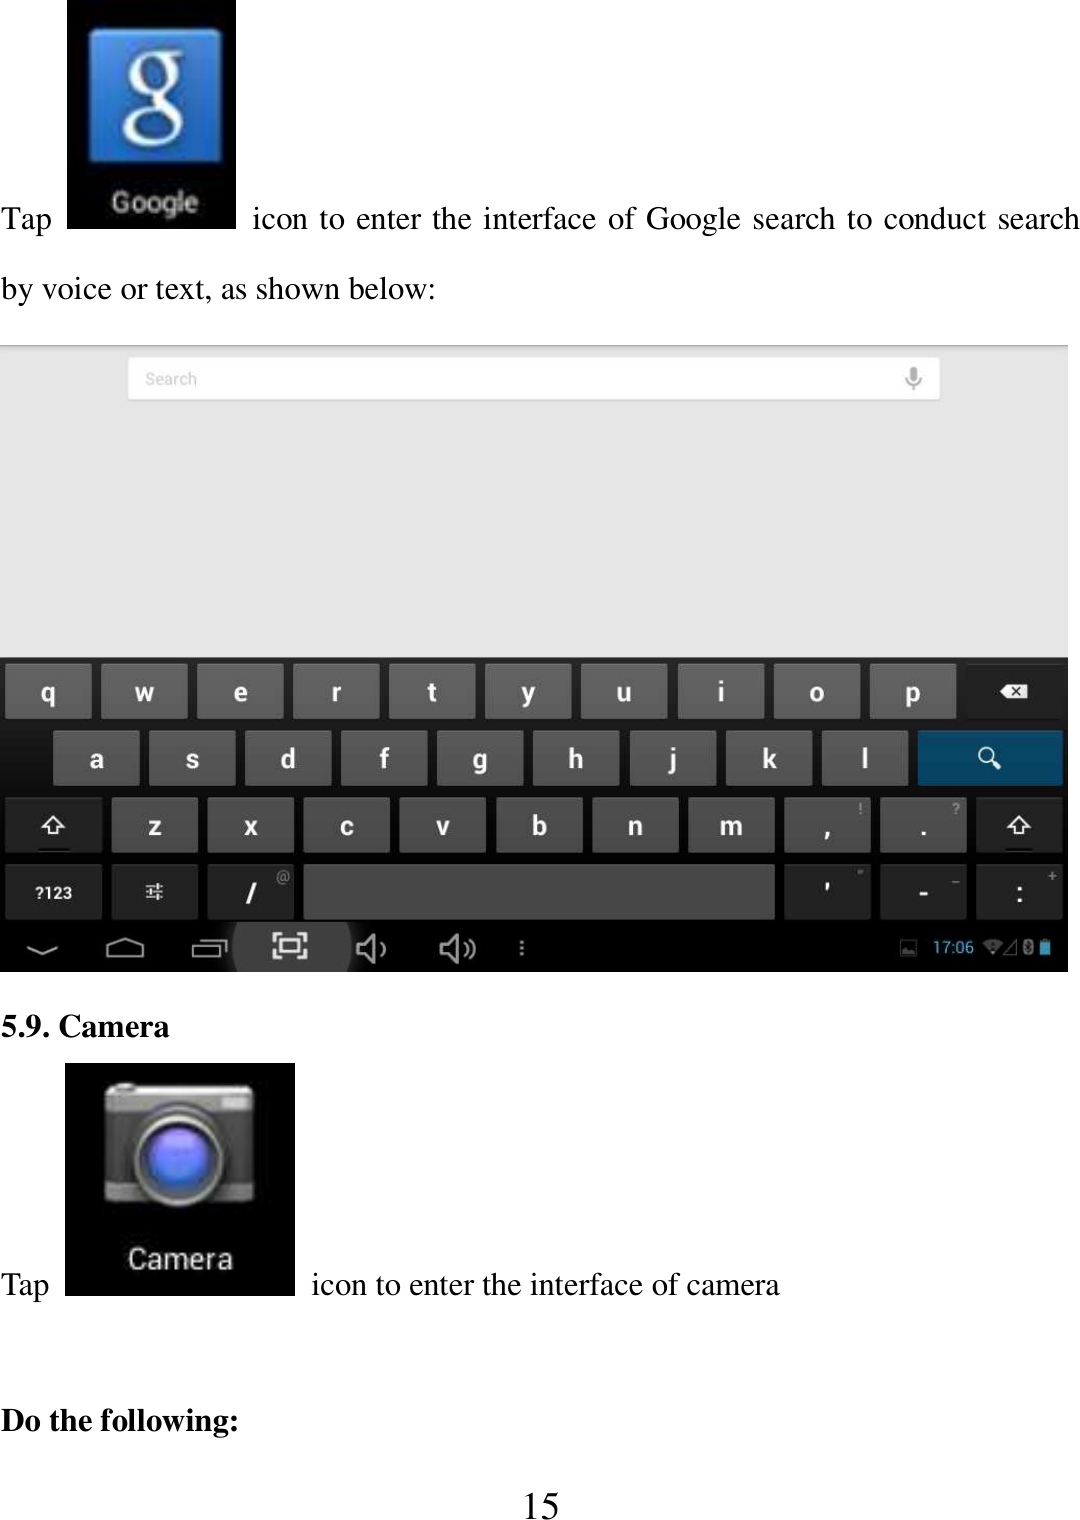   15 Tap    icon to enter the interface of Google search to conduct search by voice or text, as shown below:    5.9. Camera Tap    icon to enter the interface of camera  Do the following: 